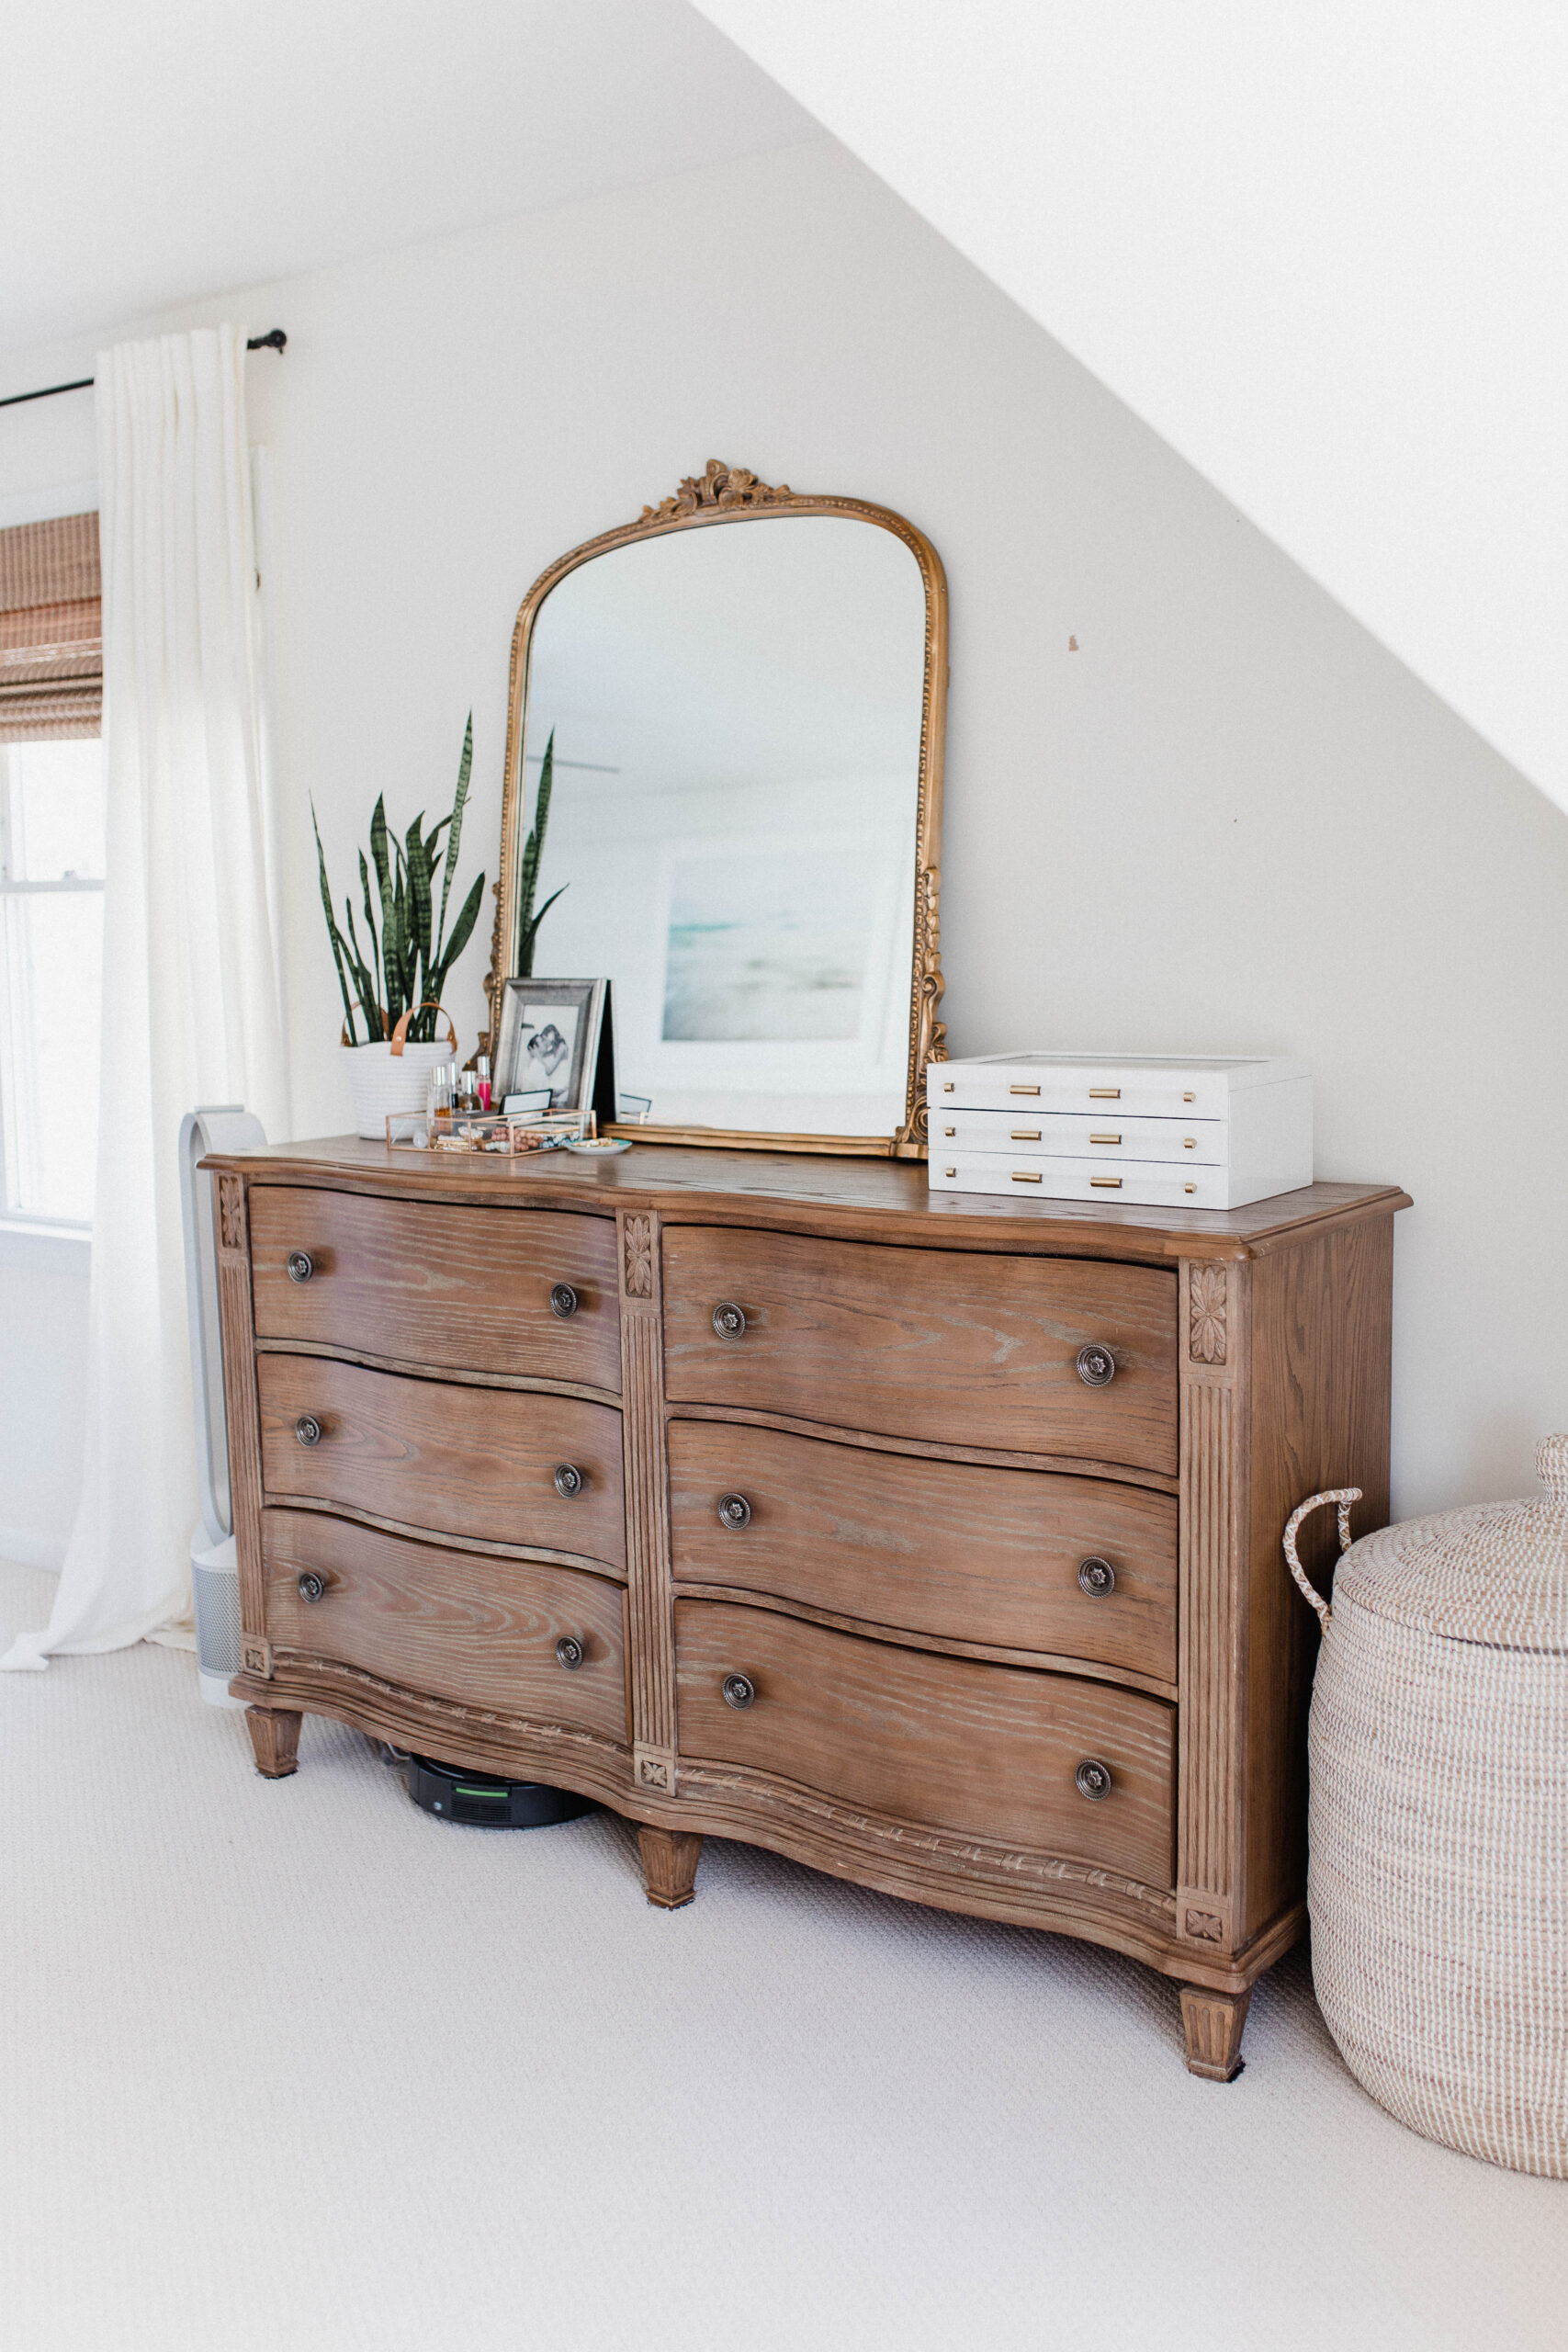 Connecticut life and style blogger Lauren McBride shares a home tour of her master bedroom, featurng paint colors and a source list.